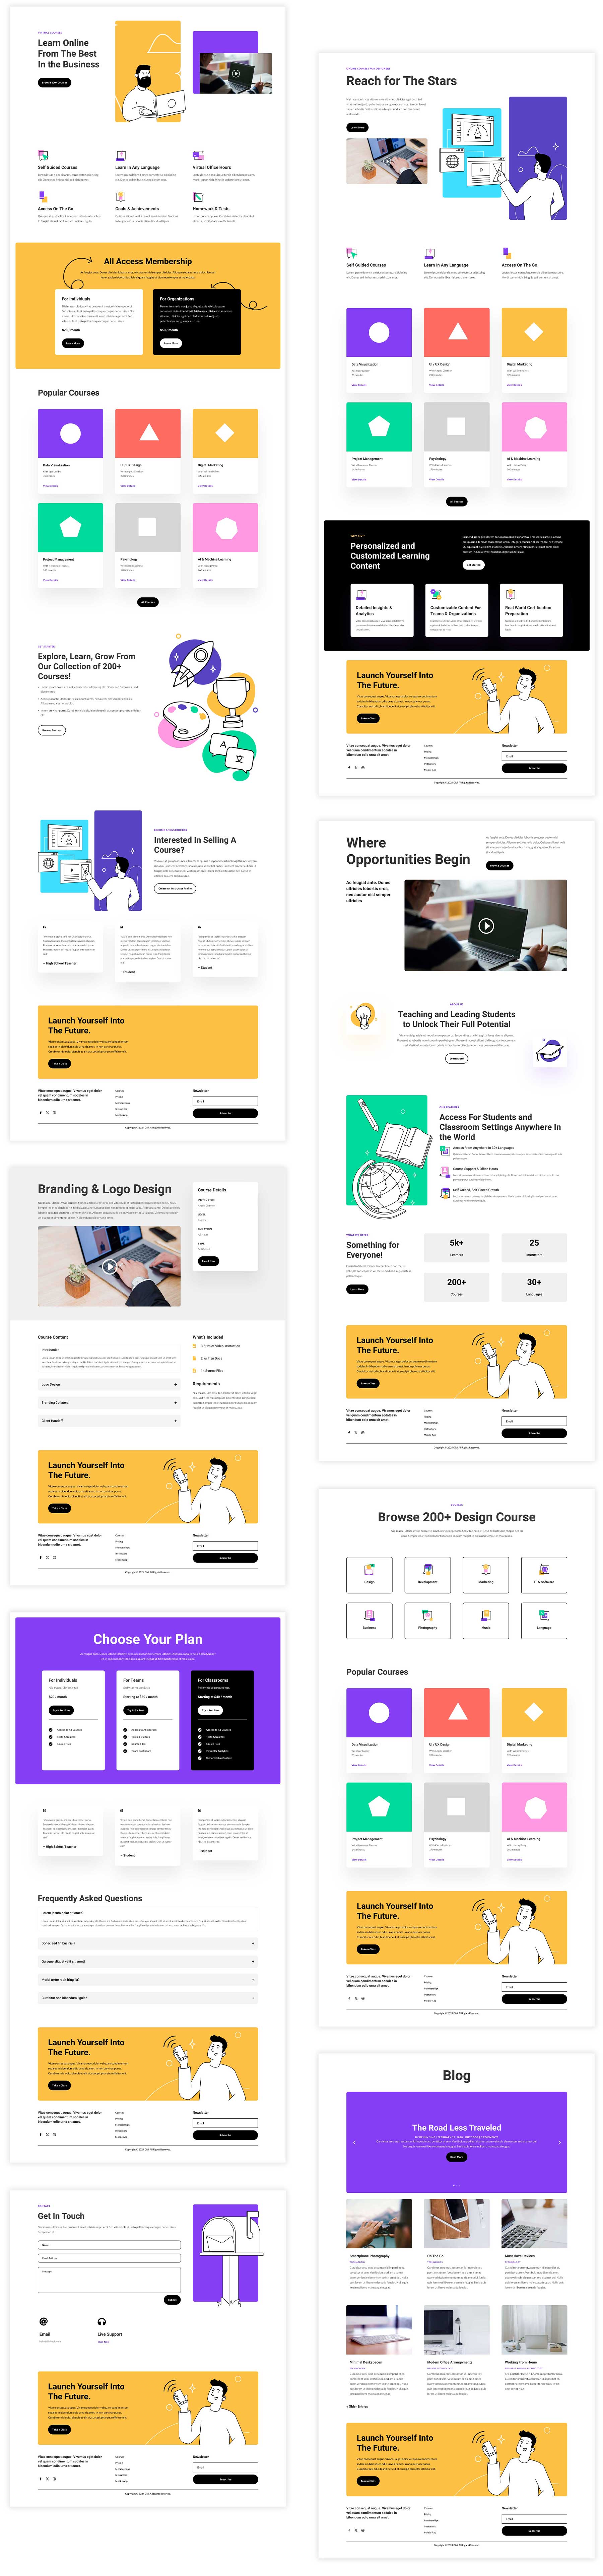 Online Learning layout pack